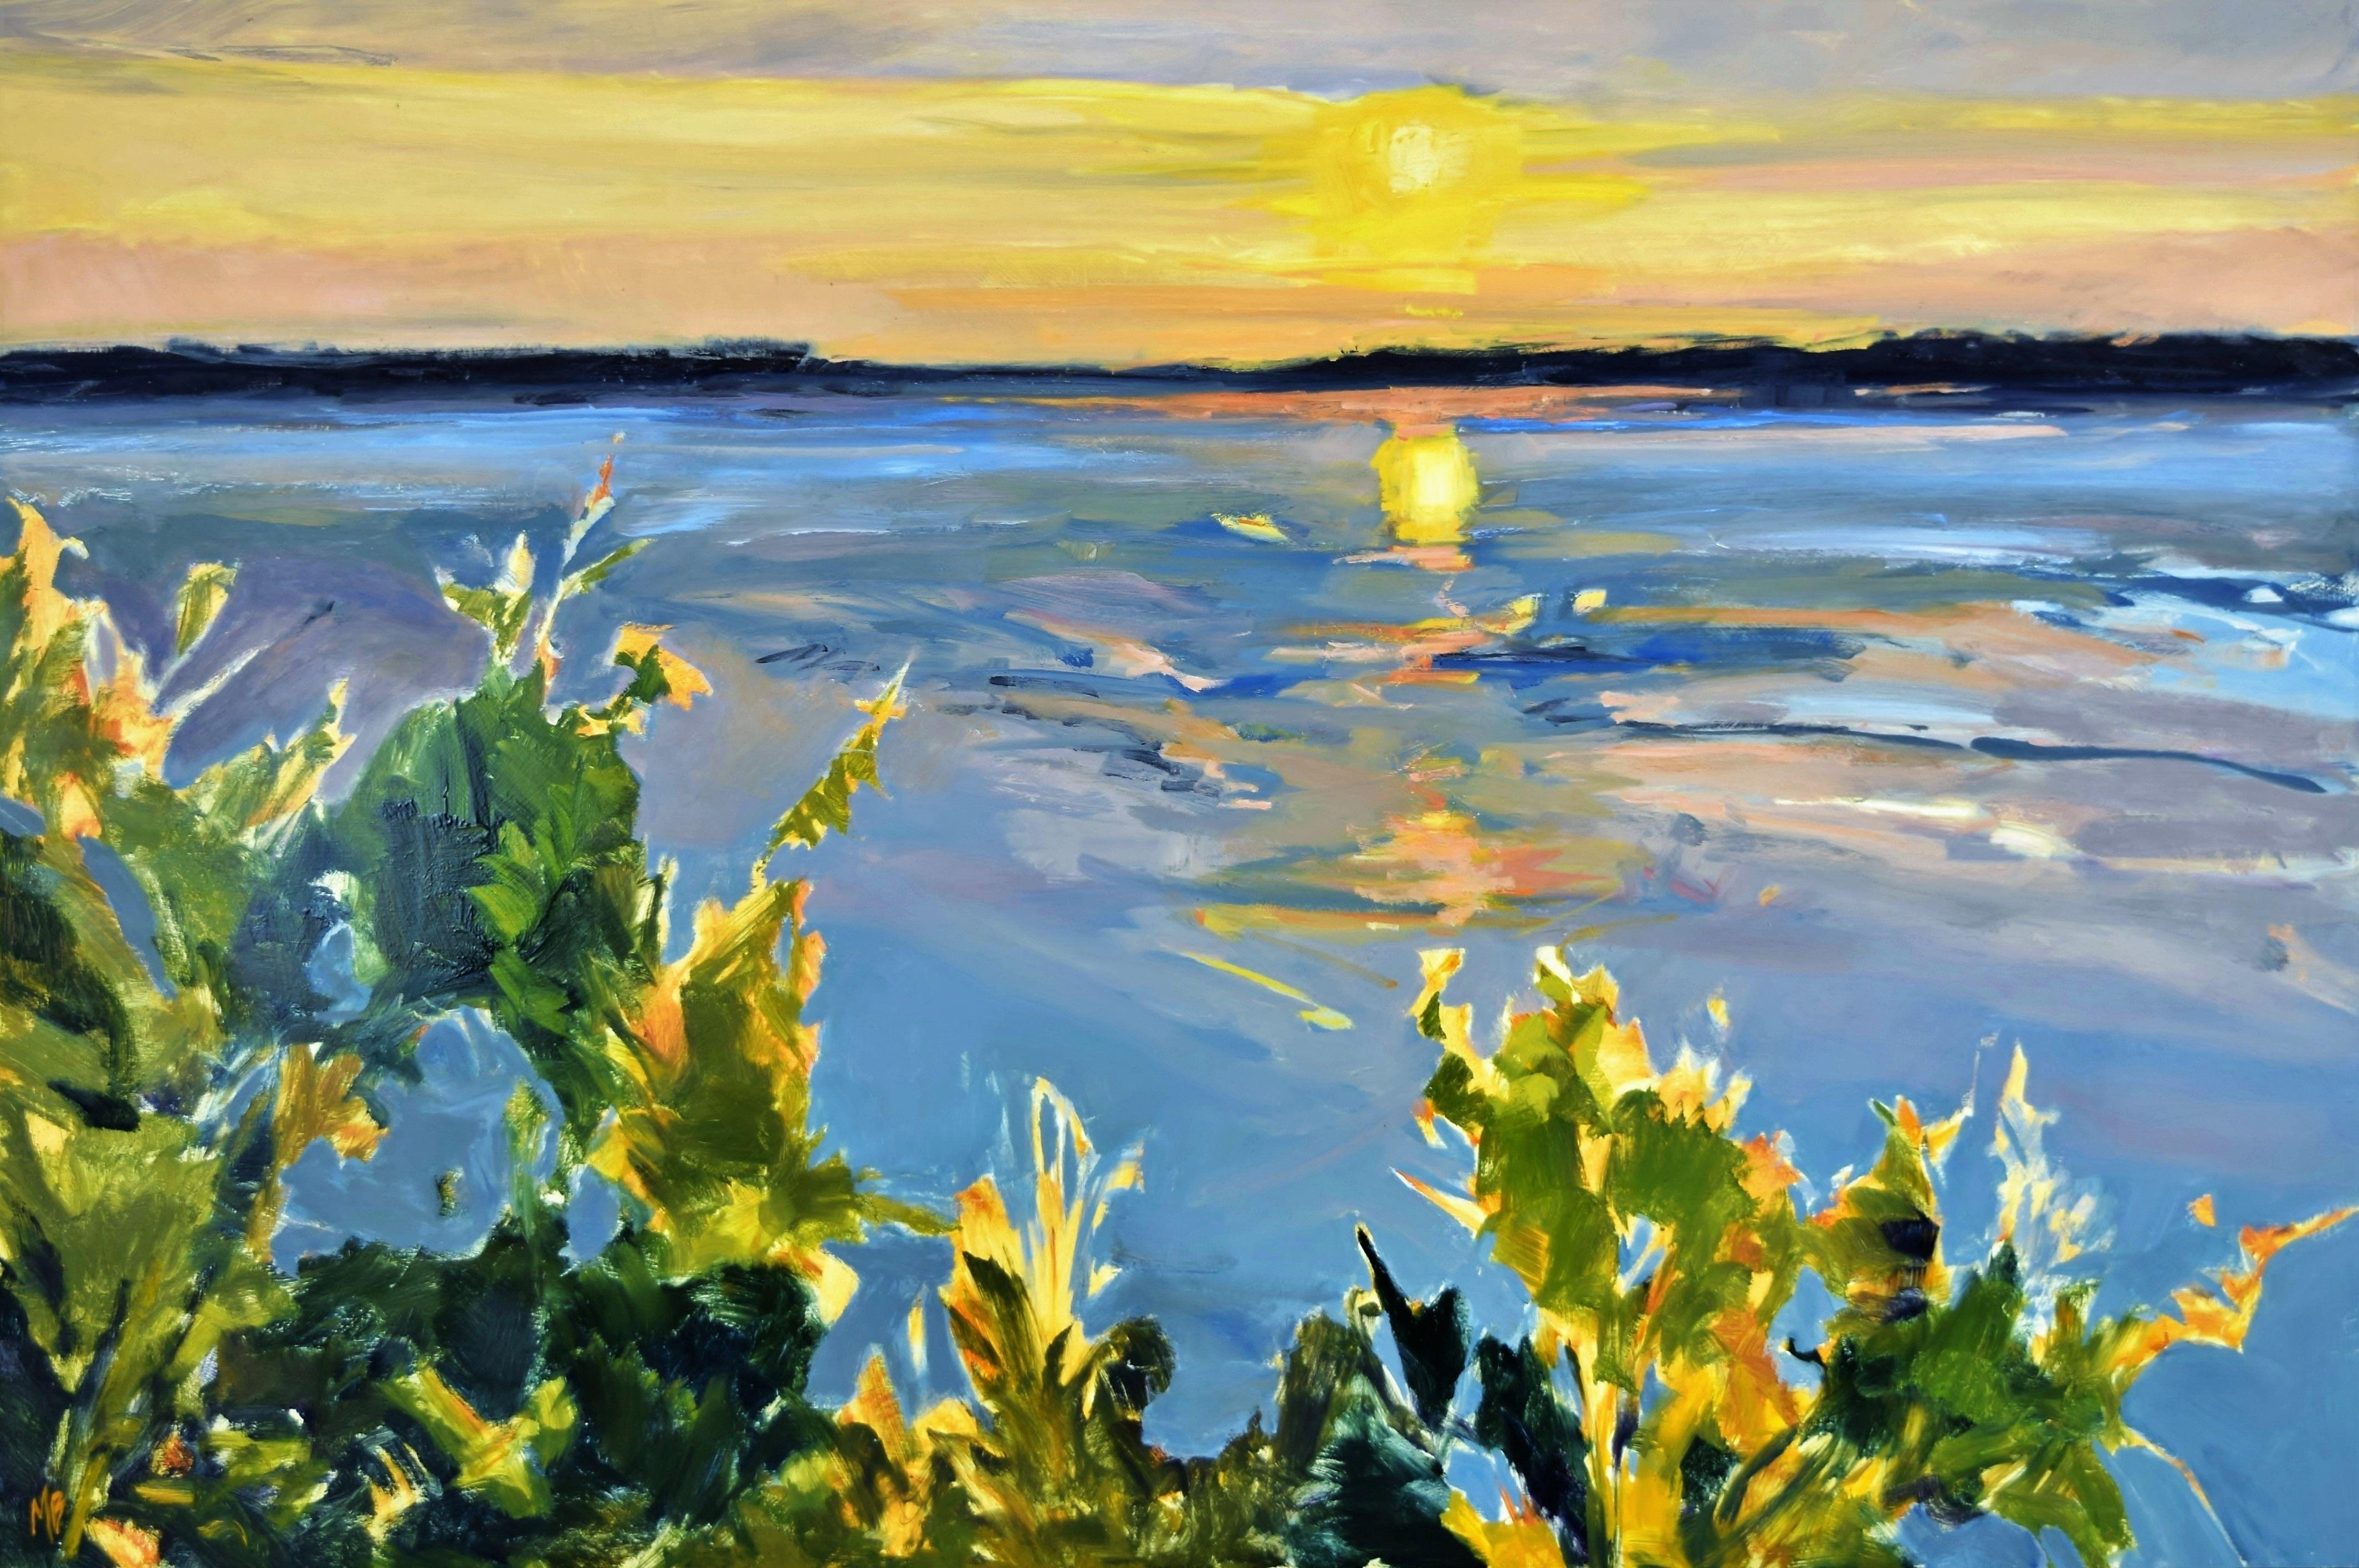 Celebrating the mighty Mississippi river. Reflected light at sunset gives the surrounding vegetation a warm glow. :: Painting :: Contemporary :: This piece comes with an official certificate of authenticity signed by the artist :: Ready to Hang: Yes